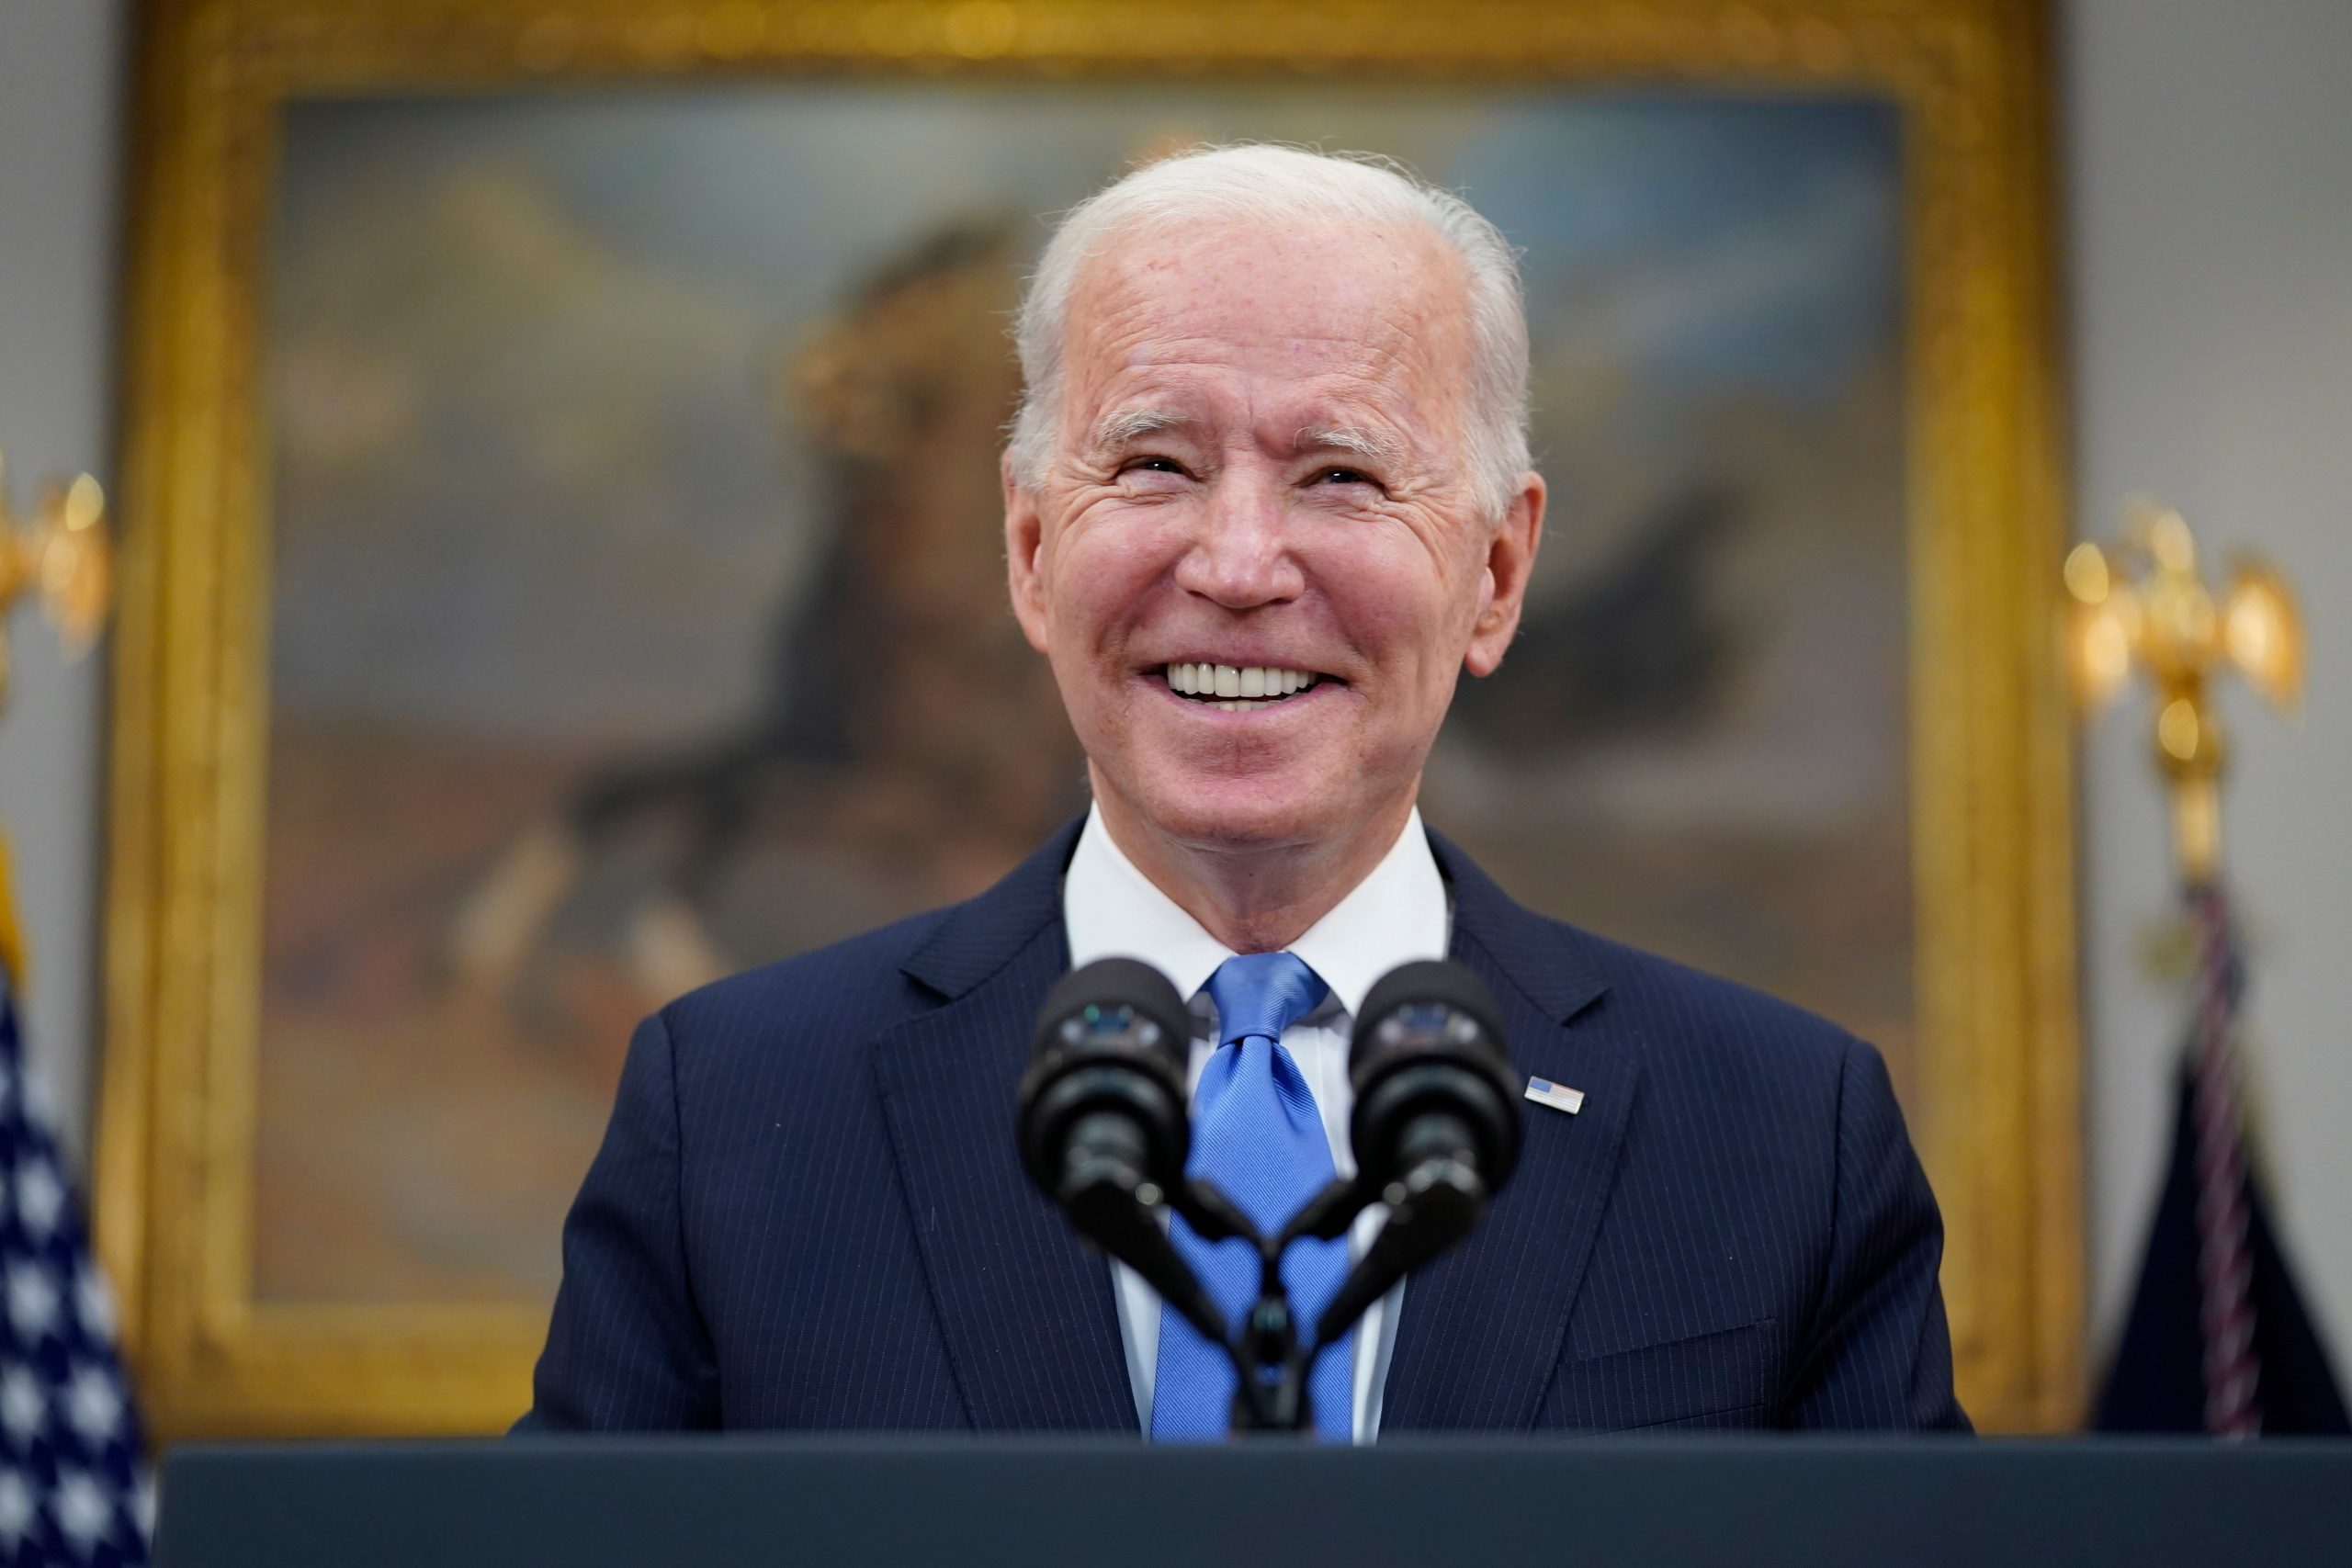 If not the White House, where is Joe Biden on most weekends? Read to know